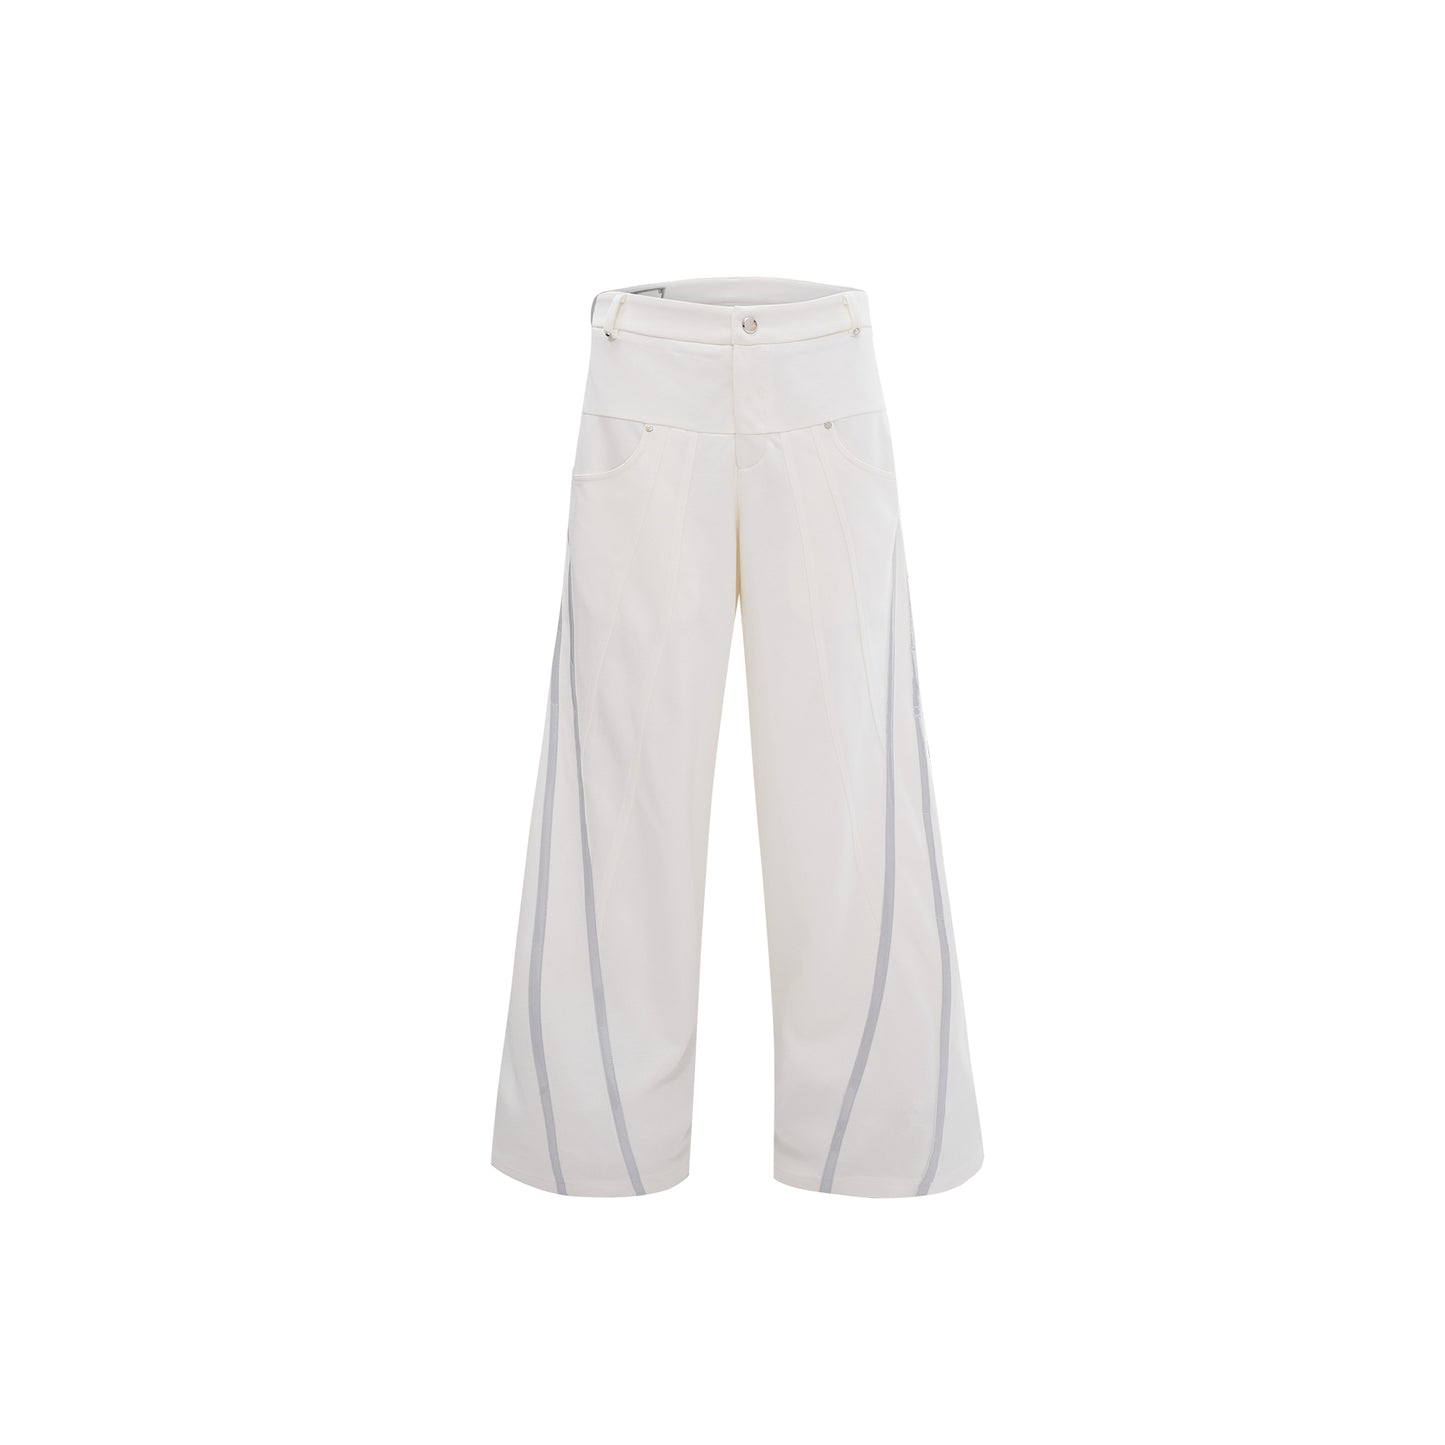 【24s June.】Reflective Striped Silhouette Draped Casual Pants